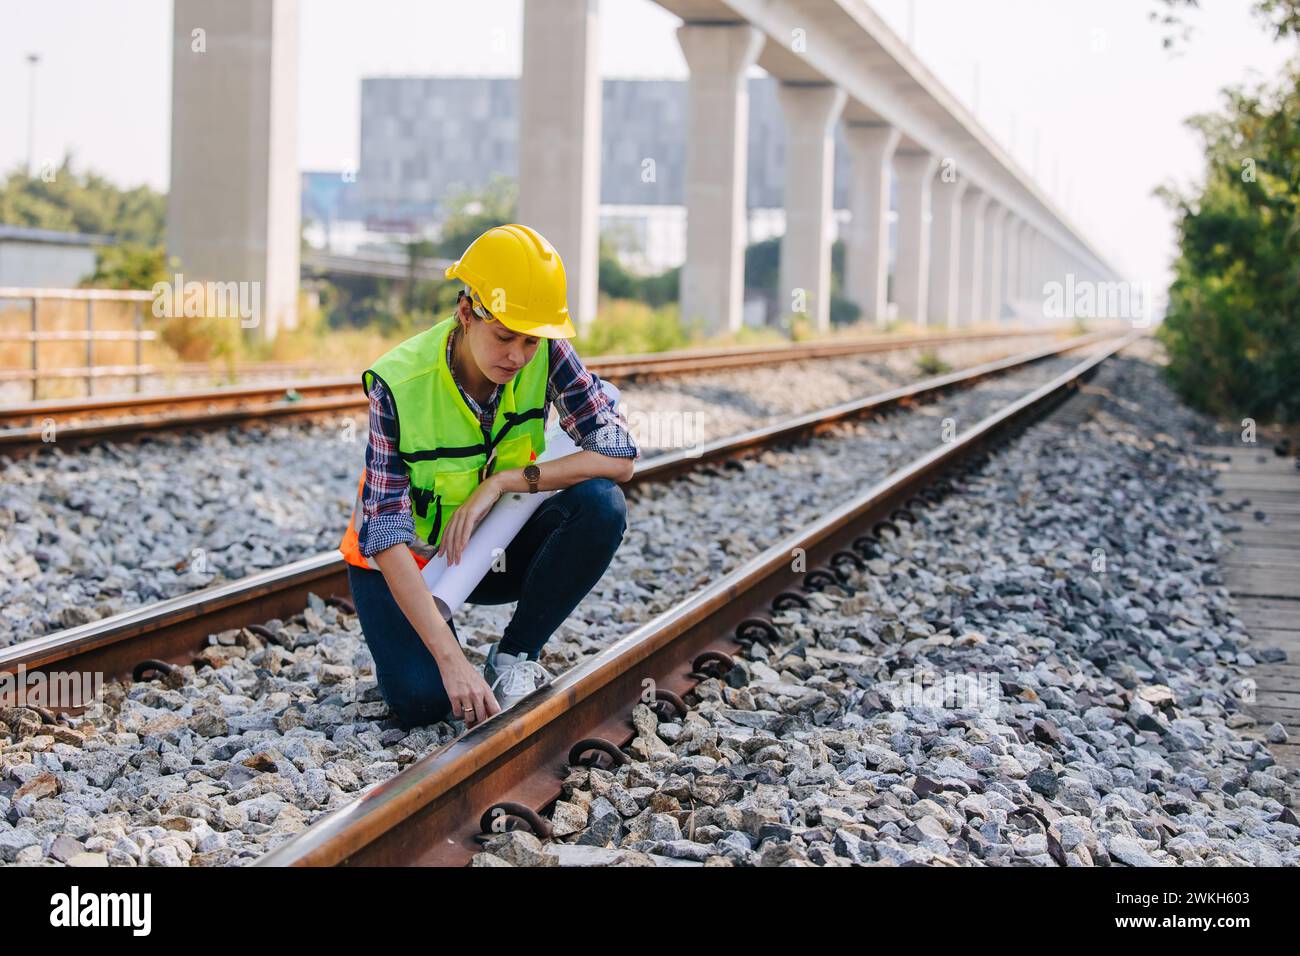 Engineer railway tracks construction service team working on site survey checking and maintenance inspection train track for safety Stock Photo